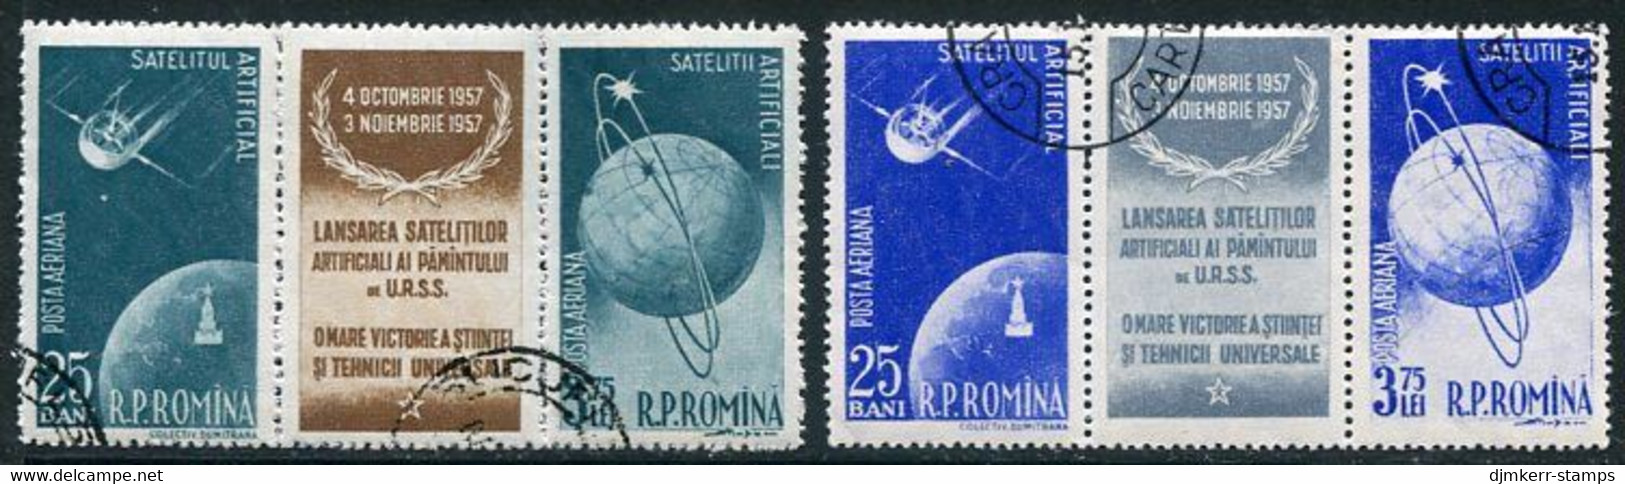 ROMANIA 1957 Launch Of First Earth Satellites Strips Used.  Michel 1677-80 - Usado